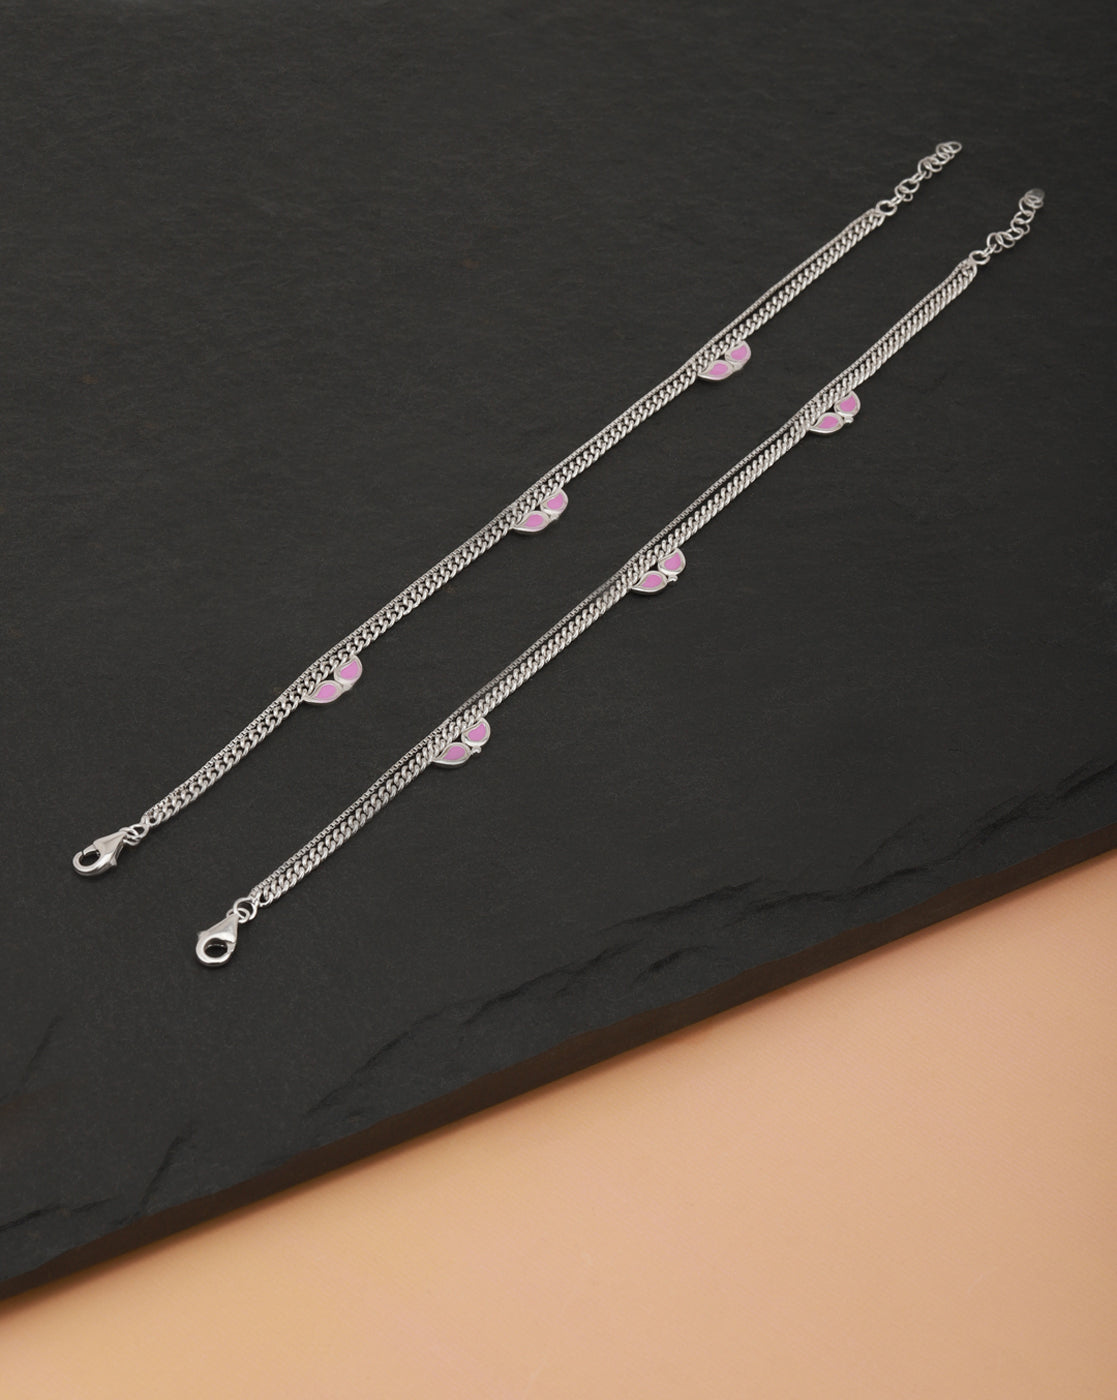 Carlton London -Set Of 2 Rhodium-Plated Silver Toned Dual Stranded Pink Enamel Anklets For Women